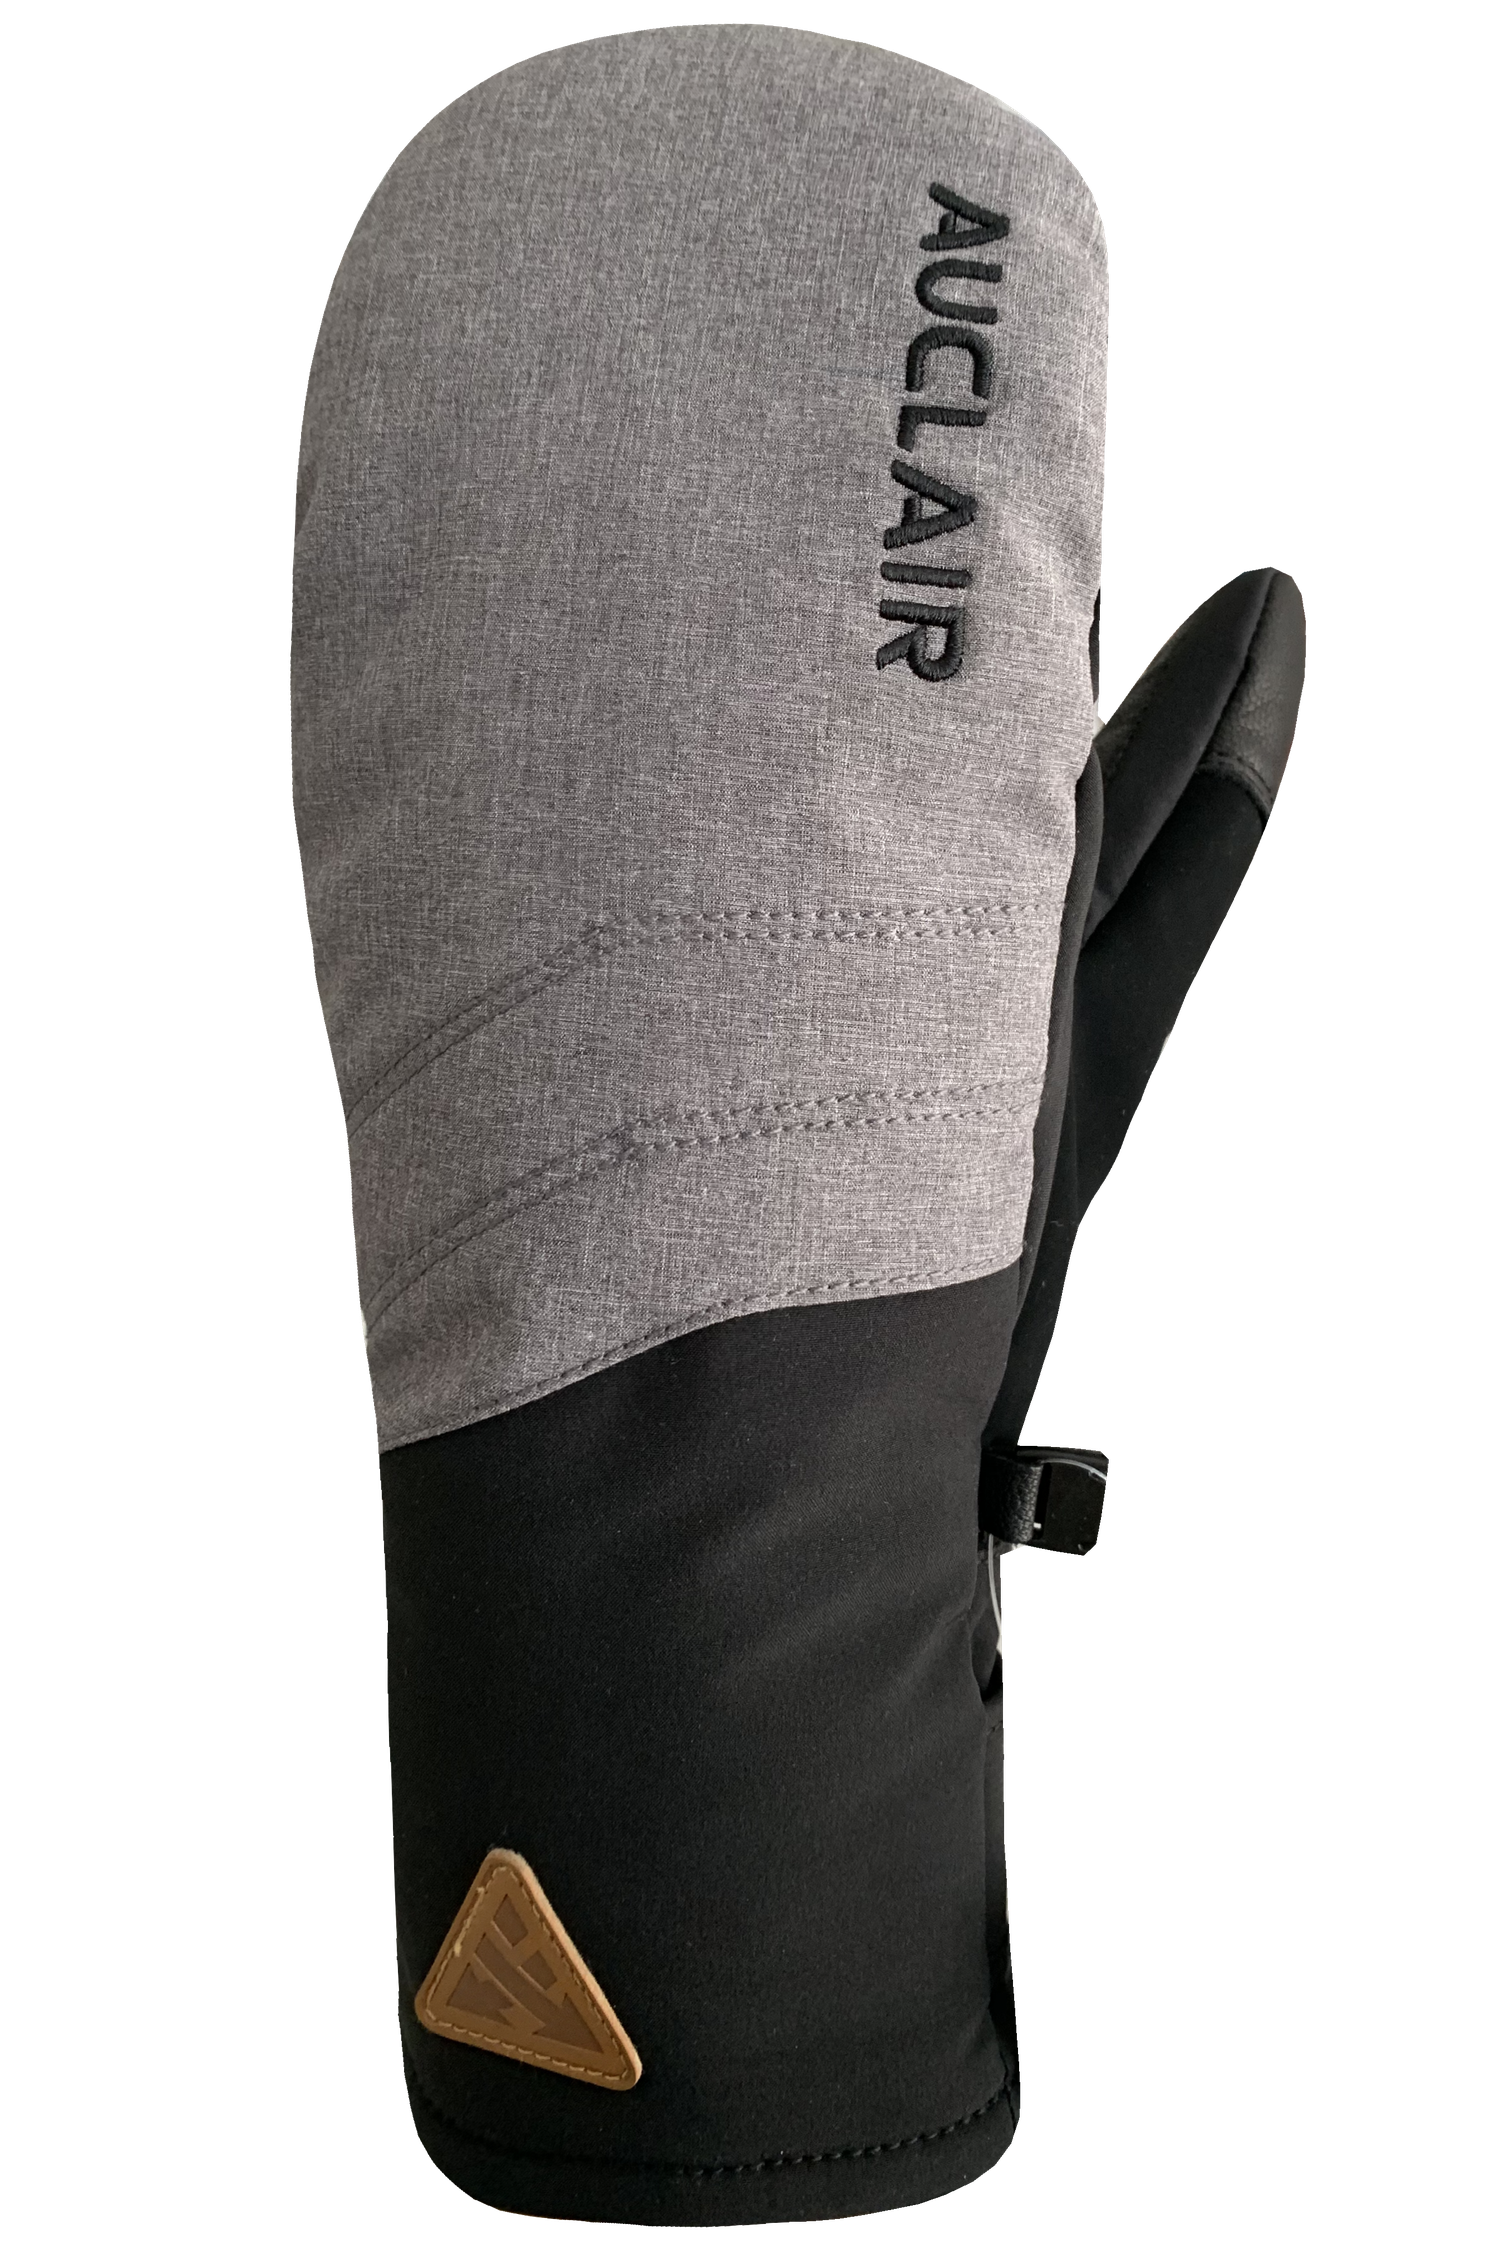 Avalanche Mitts - Adult, Black/Grey